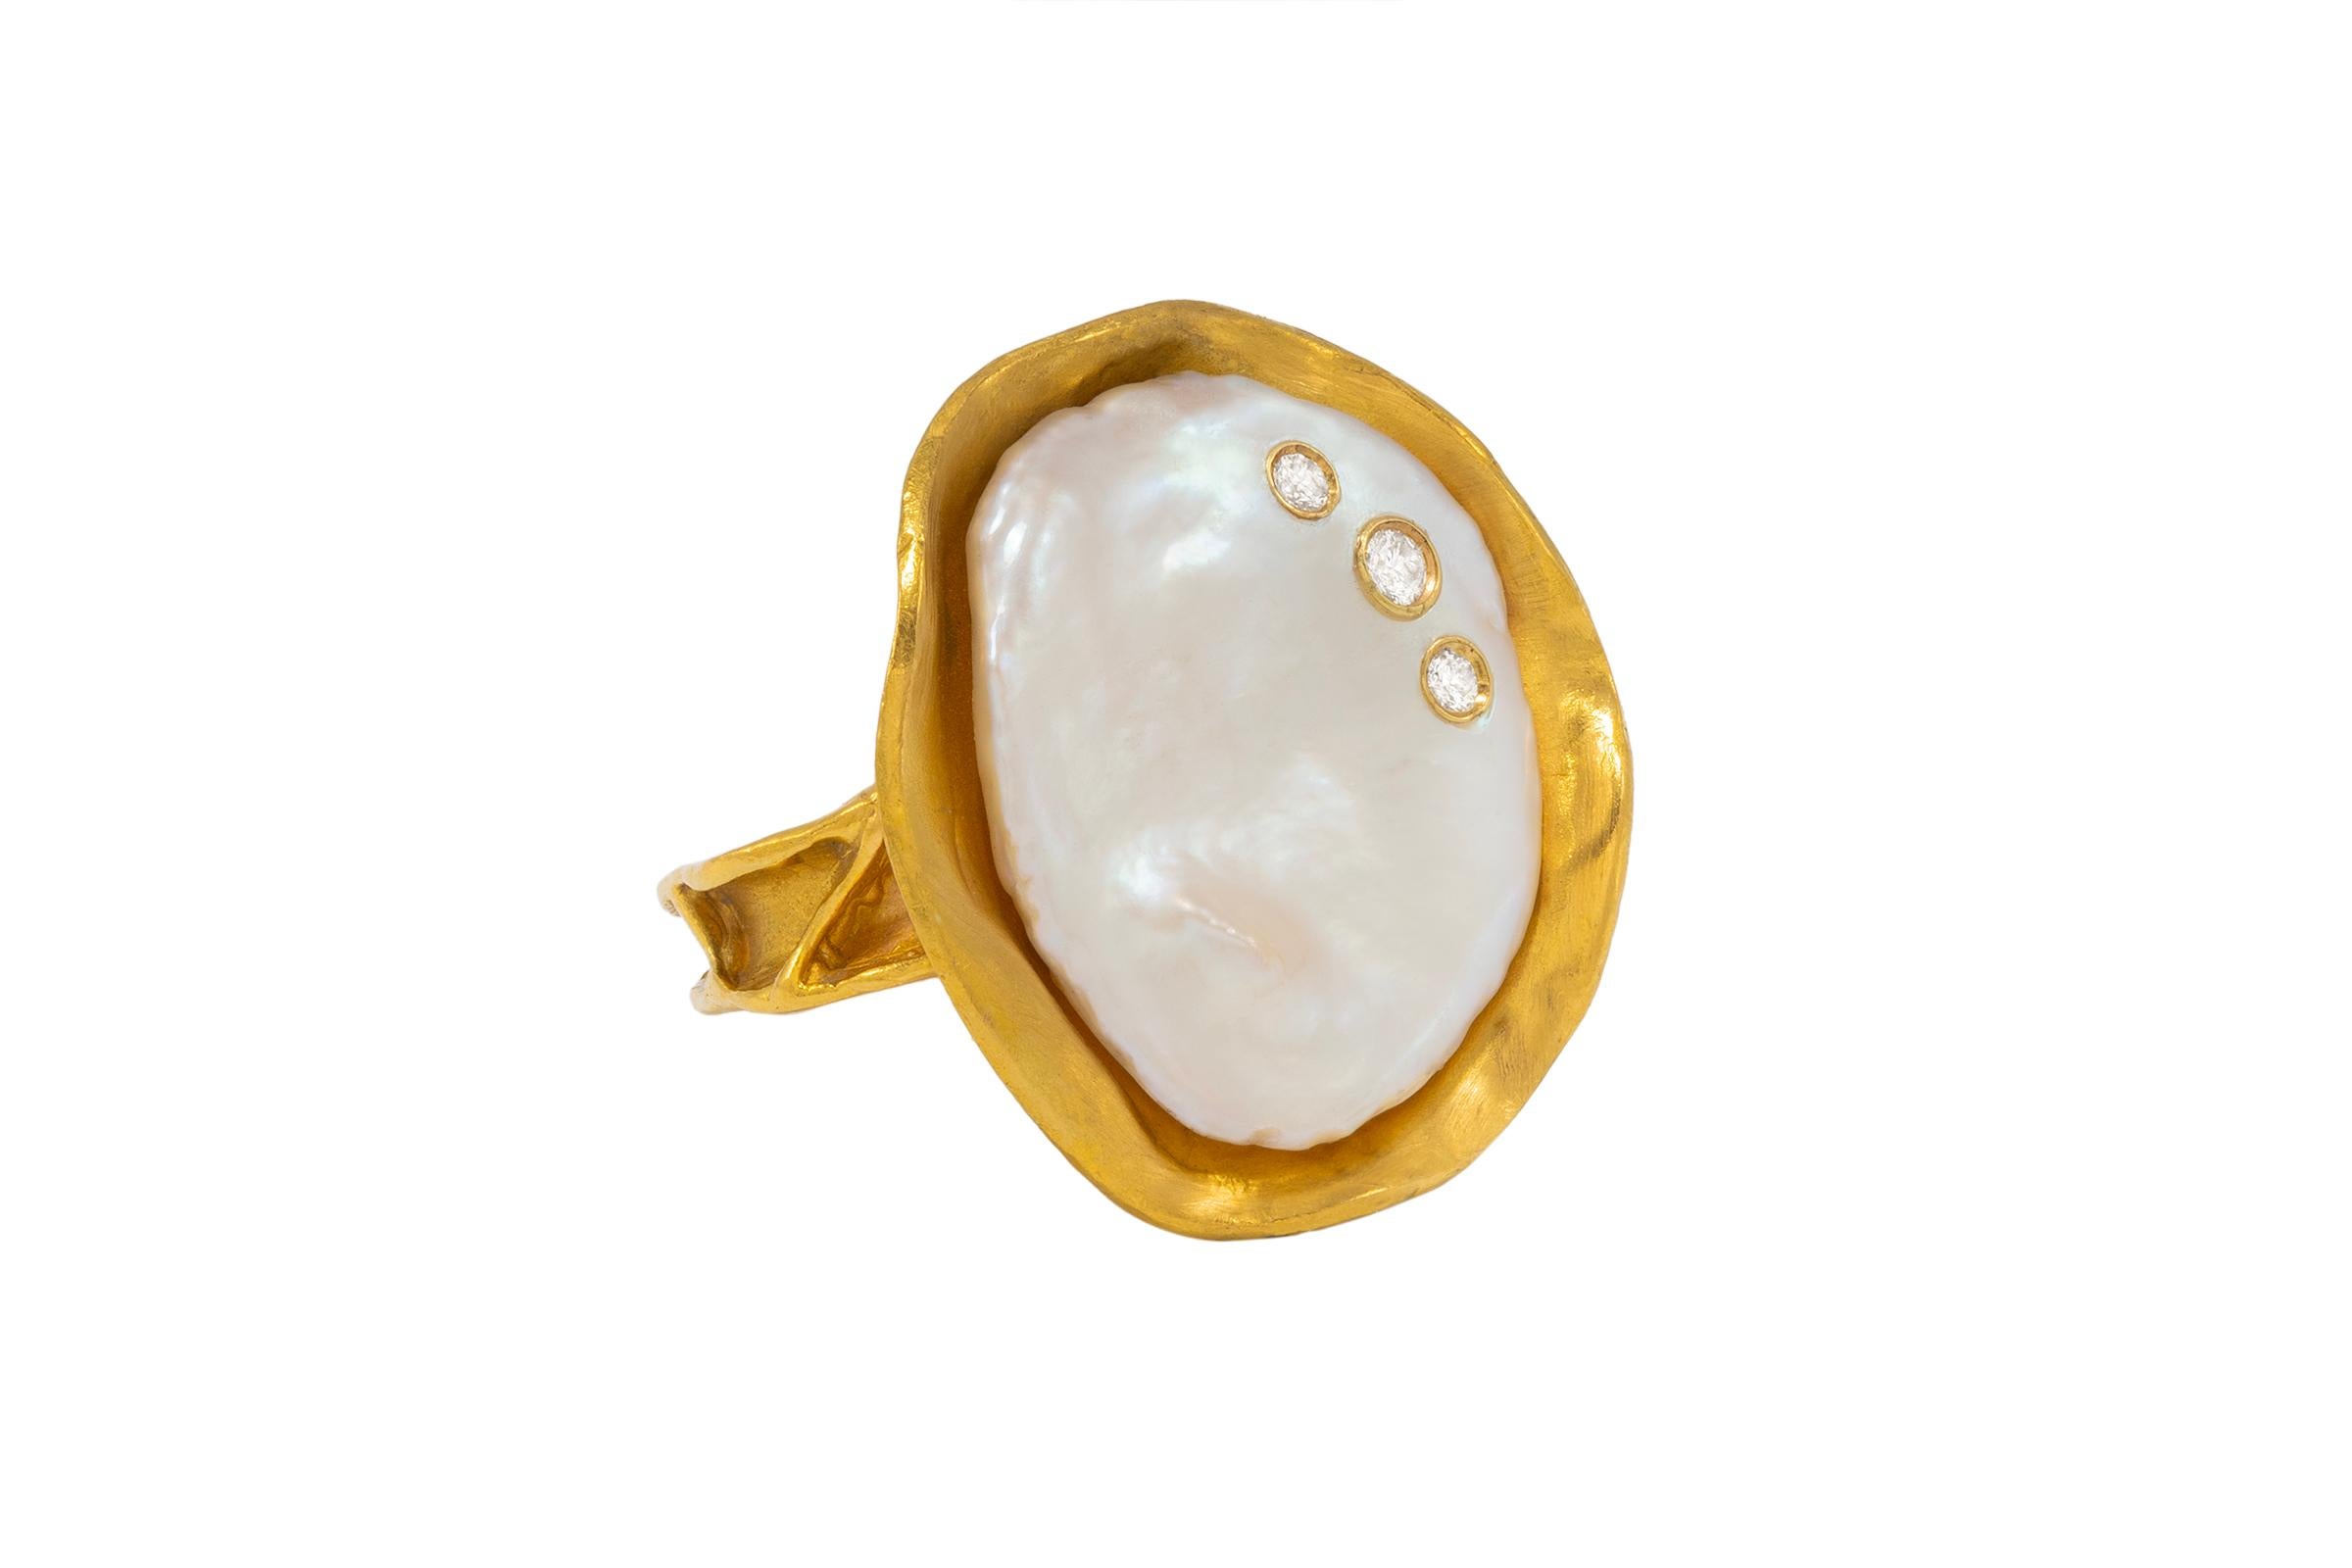 Round Cut Diamond and Pearl Cocktail Ring in 22k Gold, by Tagili For Sale